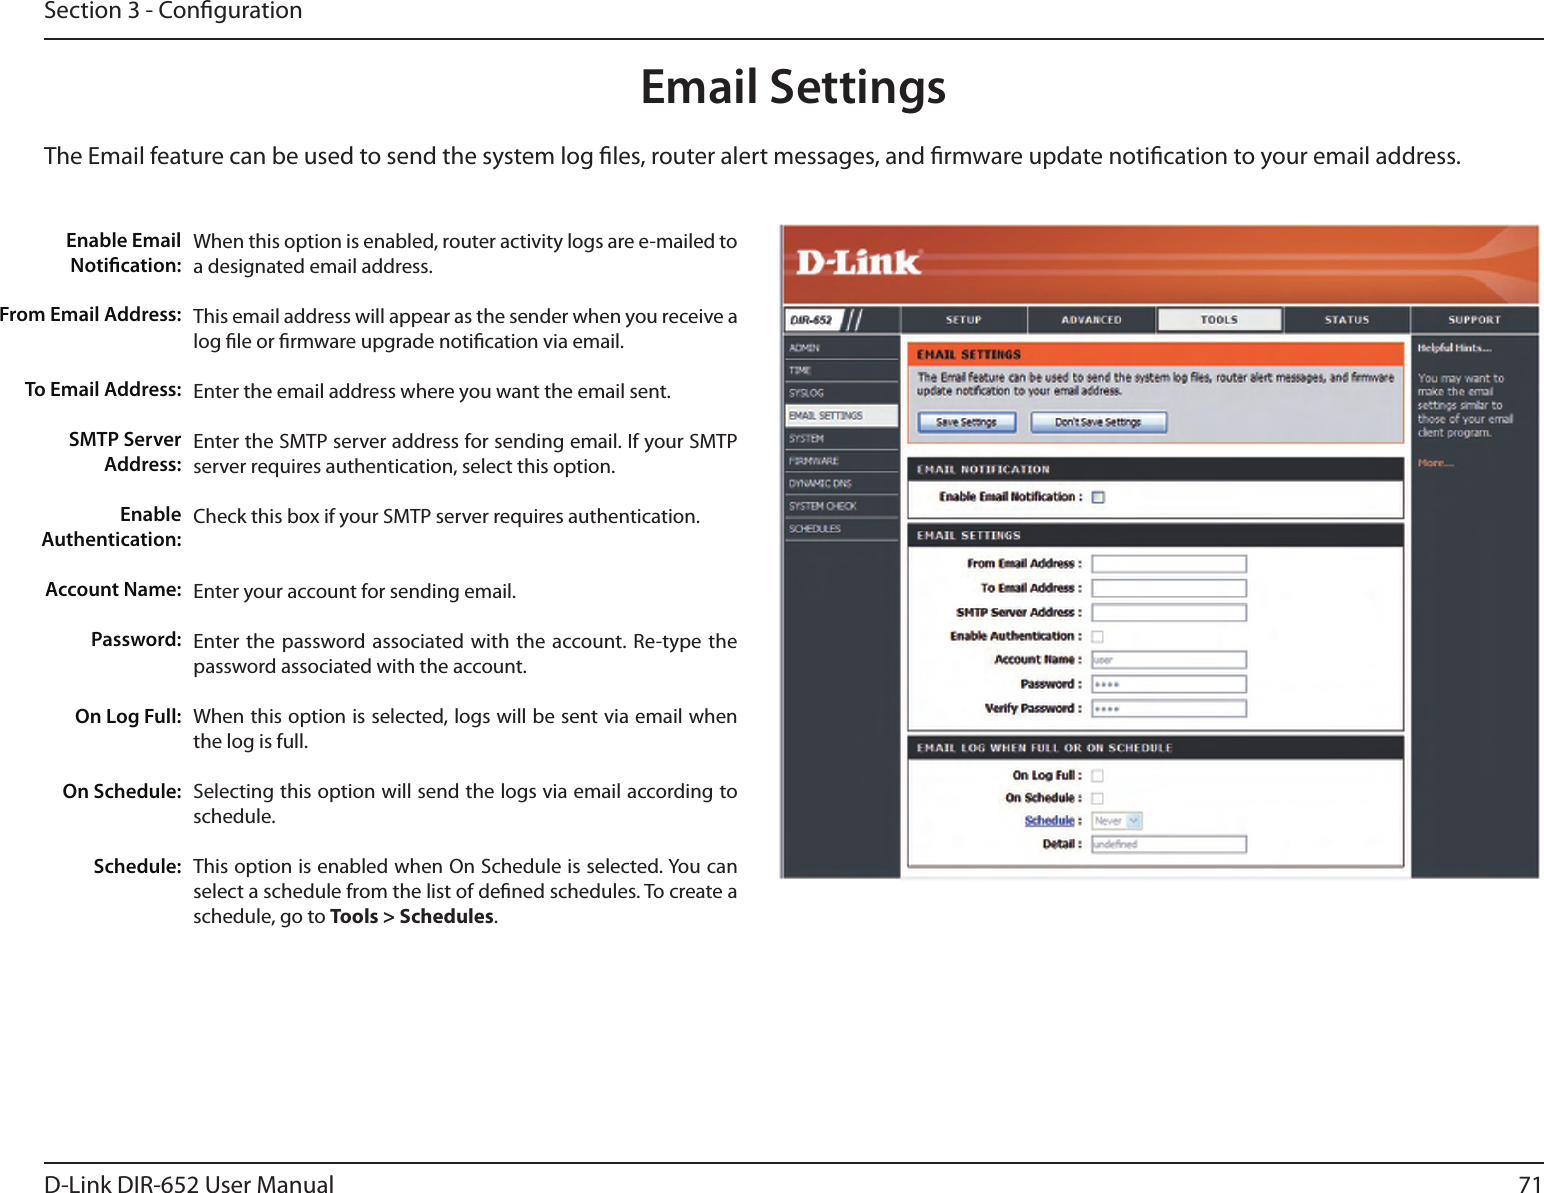 71D-Link DIR-652 User ManualSection 3 - CongurationEmail SettingsThe Email feature can be used to send the system log les, router alert messages, and rmware update notication to your email address. Enable Email Notication: From Email Address:To Email Address:SMTP Server Address:Enable Authentication:Account Name:Password:On Log Full:On Schedule:Schedule:When this option is enabled, router activity logs are e-mailed to a designated email address.This email address will appear as the sender when you receive a log le or rmware upgrade notication via email.Enter the email address where you want the email sent. Enter the SMTP server address for sending email. If your SMTP server requires authentication, select this option.Check this box if your SMTP server requires authentication. Enter your account for sending email.Enter the password associated with the account. Re-type the password associated with the account.When this option is selected, logs will be sent via email when the log is full.Selecting this option will send the logs via email according to schedule.This option is enabled when On Schedule is selected. You can select a schedule from the list of dened schedules. To create a schedule, go to Tools &gt; Schedules.